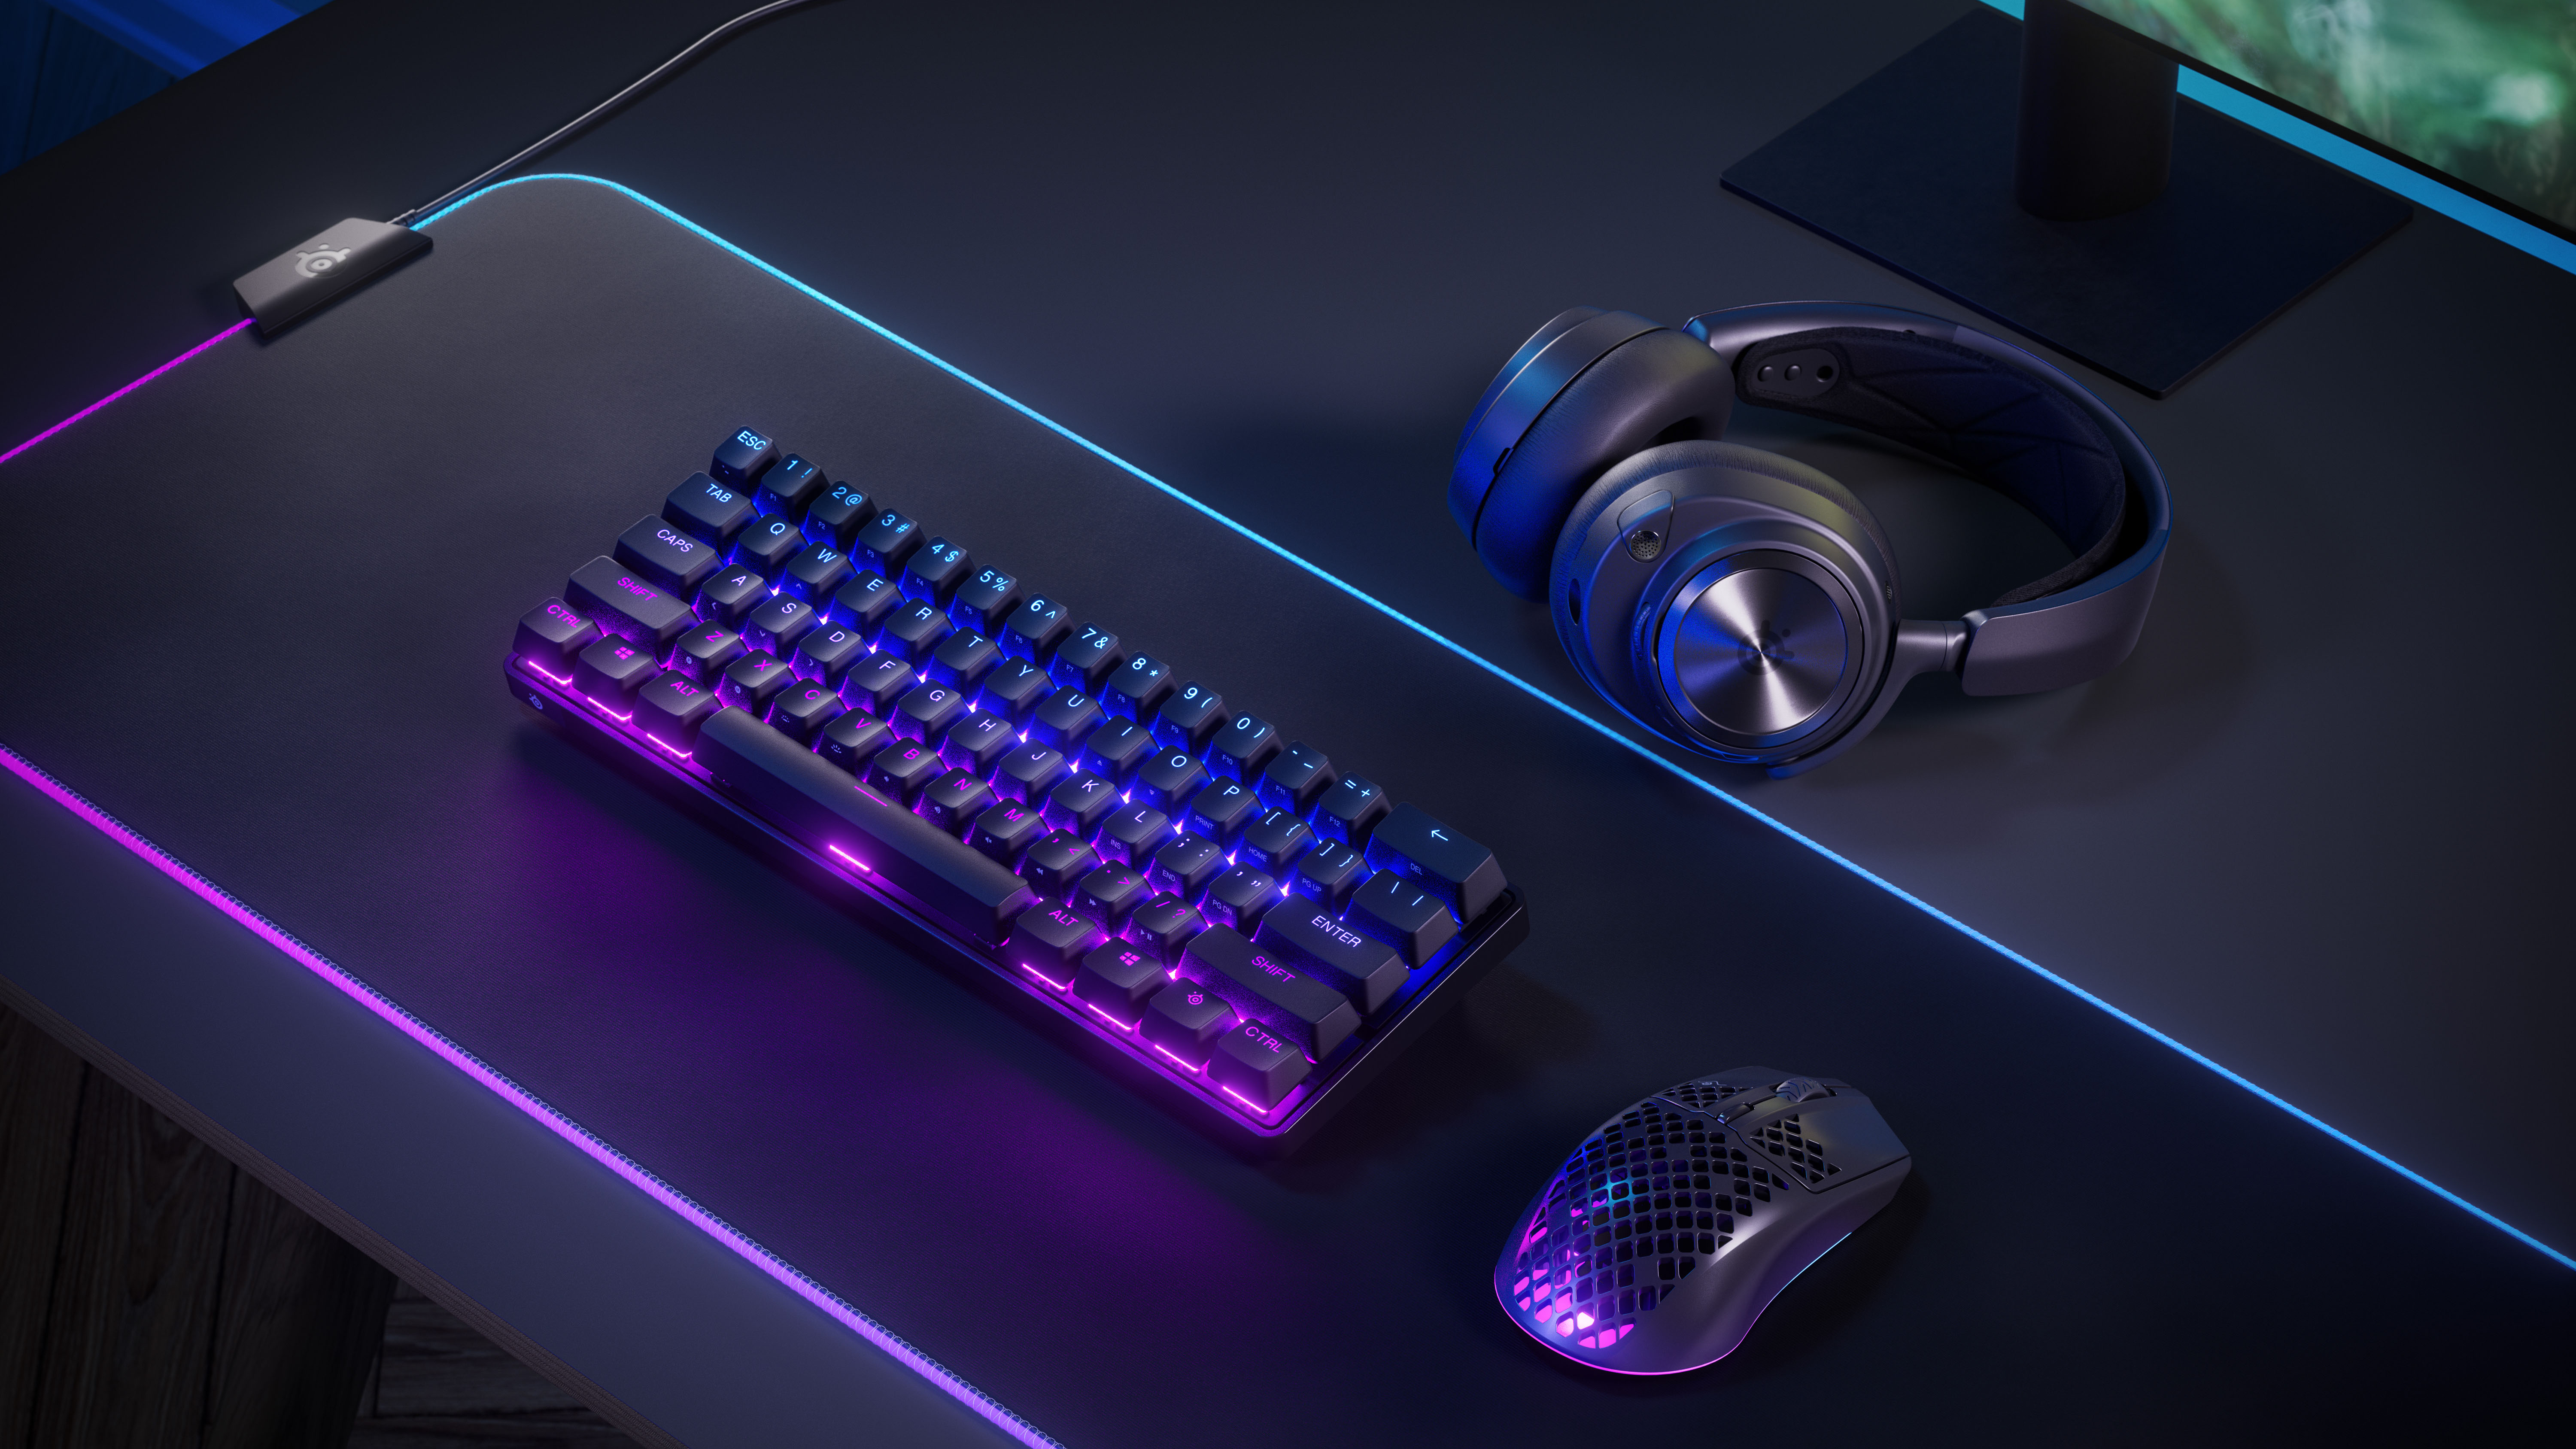 Apex Pro TKL 2023 From SteelSeries, The Latest In The Apex Pro TKL Line ...